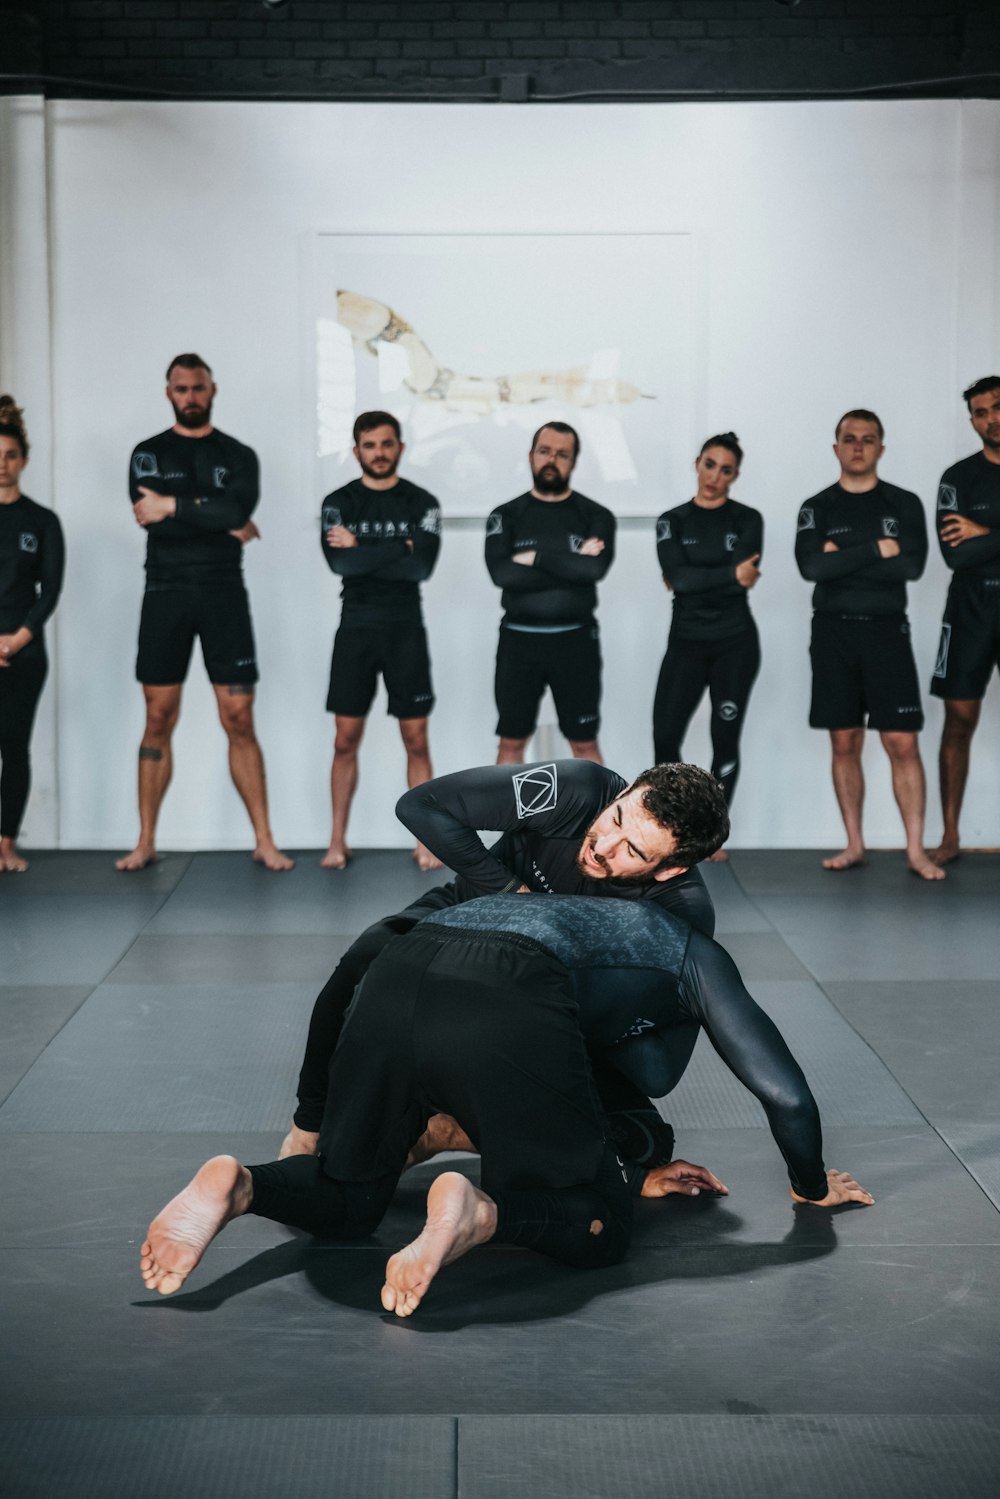 group of people in black shirts and black pants doing yoga